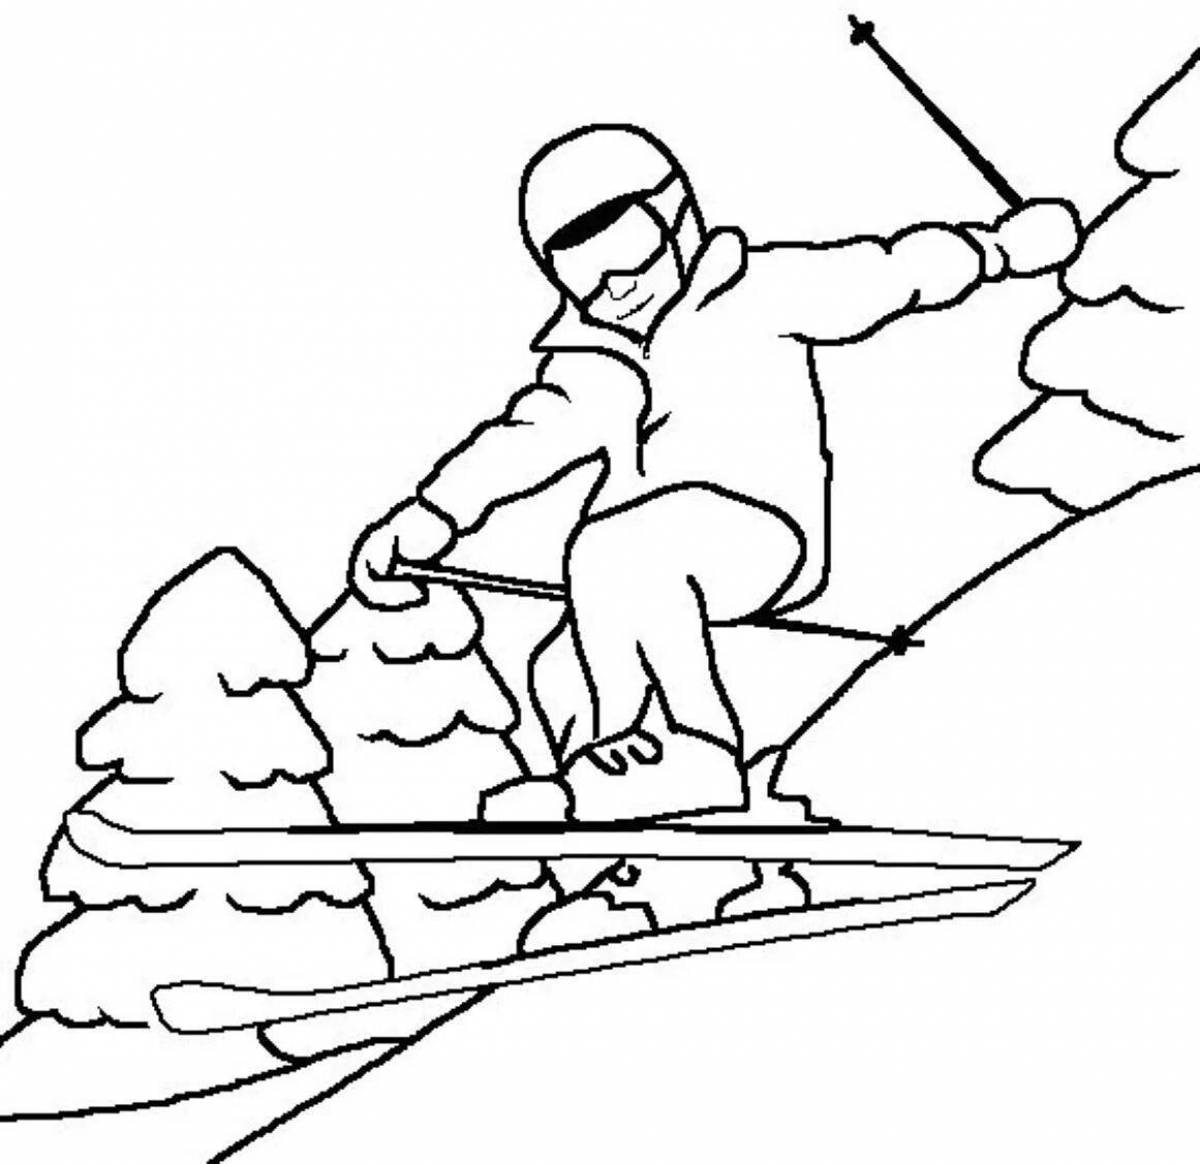 Playful winter sports coloring page